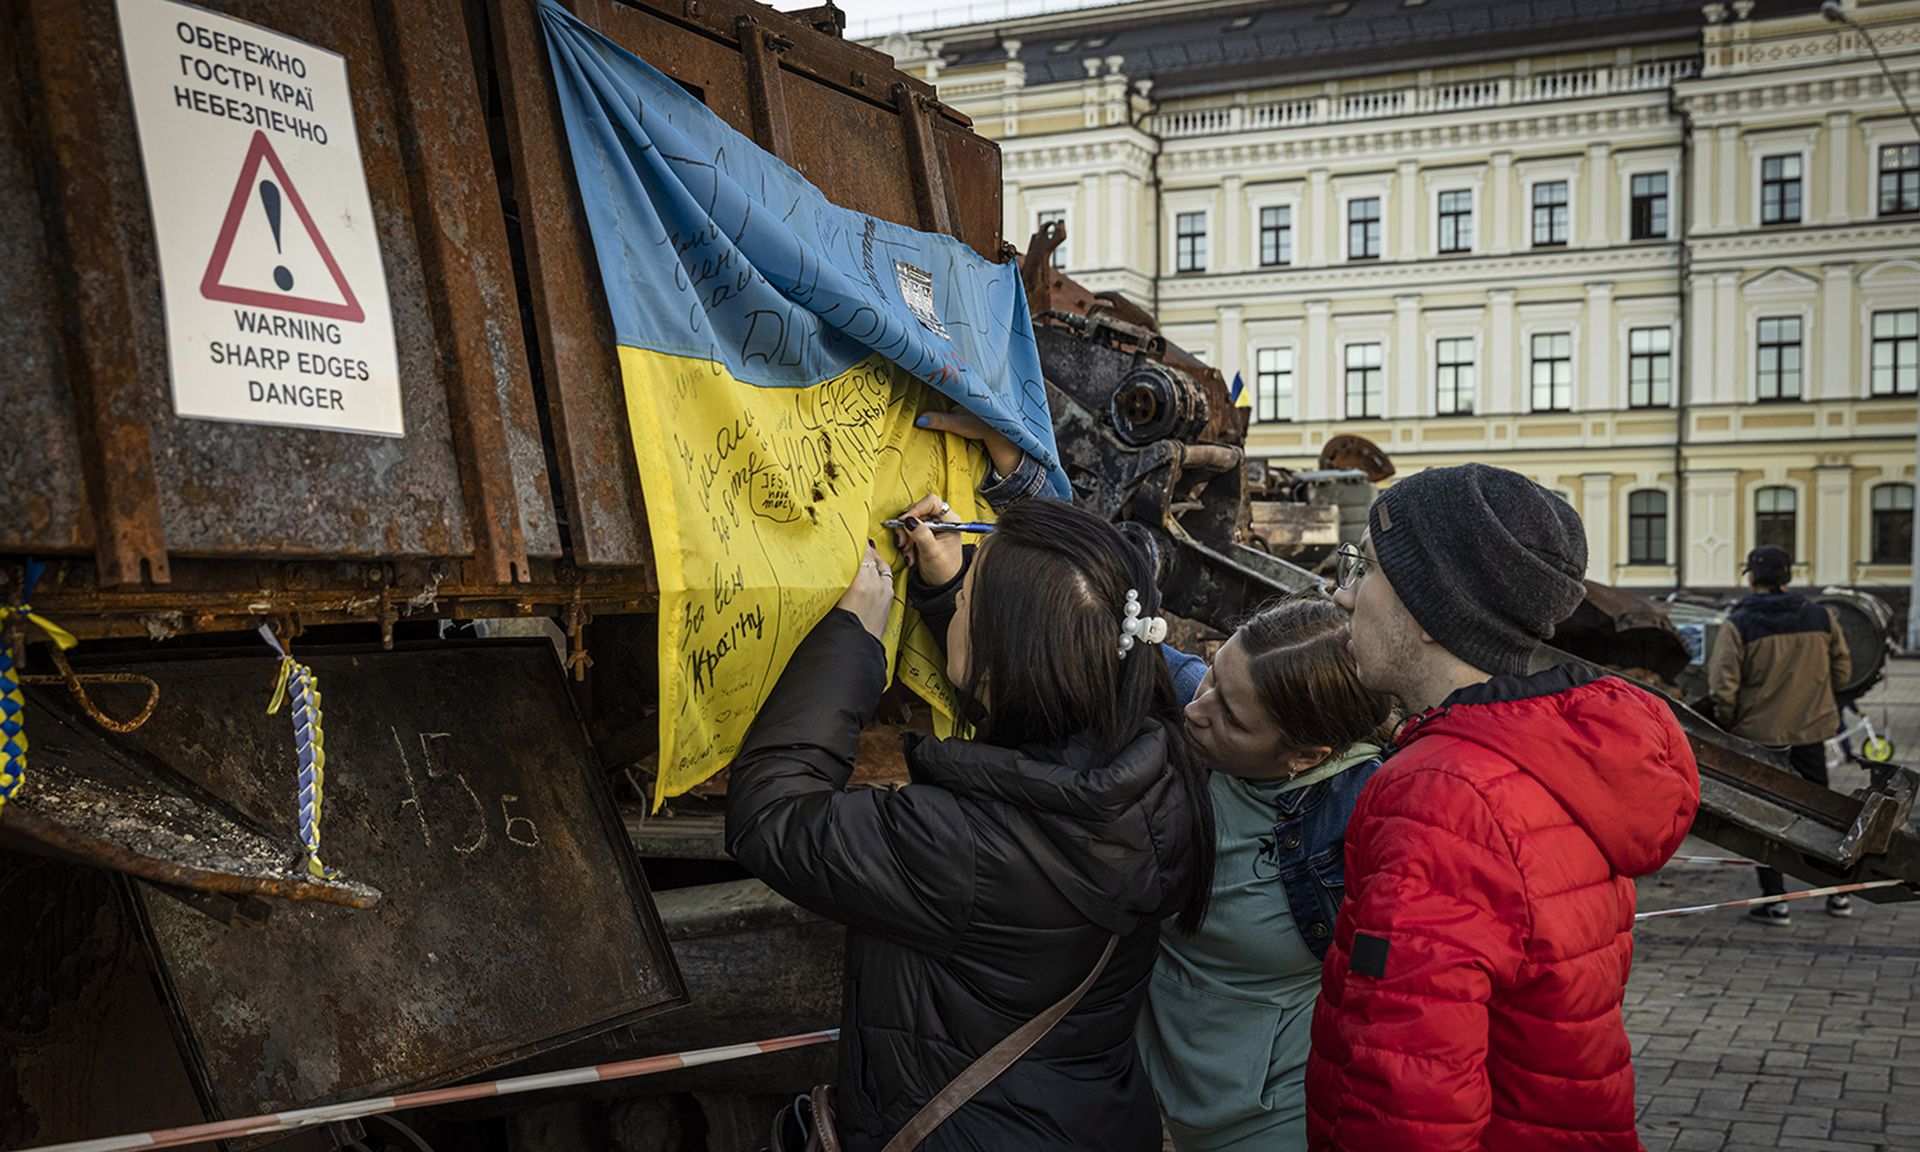 A girl writes one a Ukrainian flag as people look at an exhibition of tanks and military equipment on display.